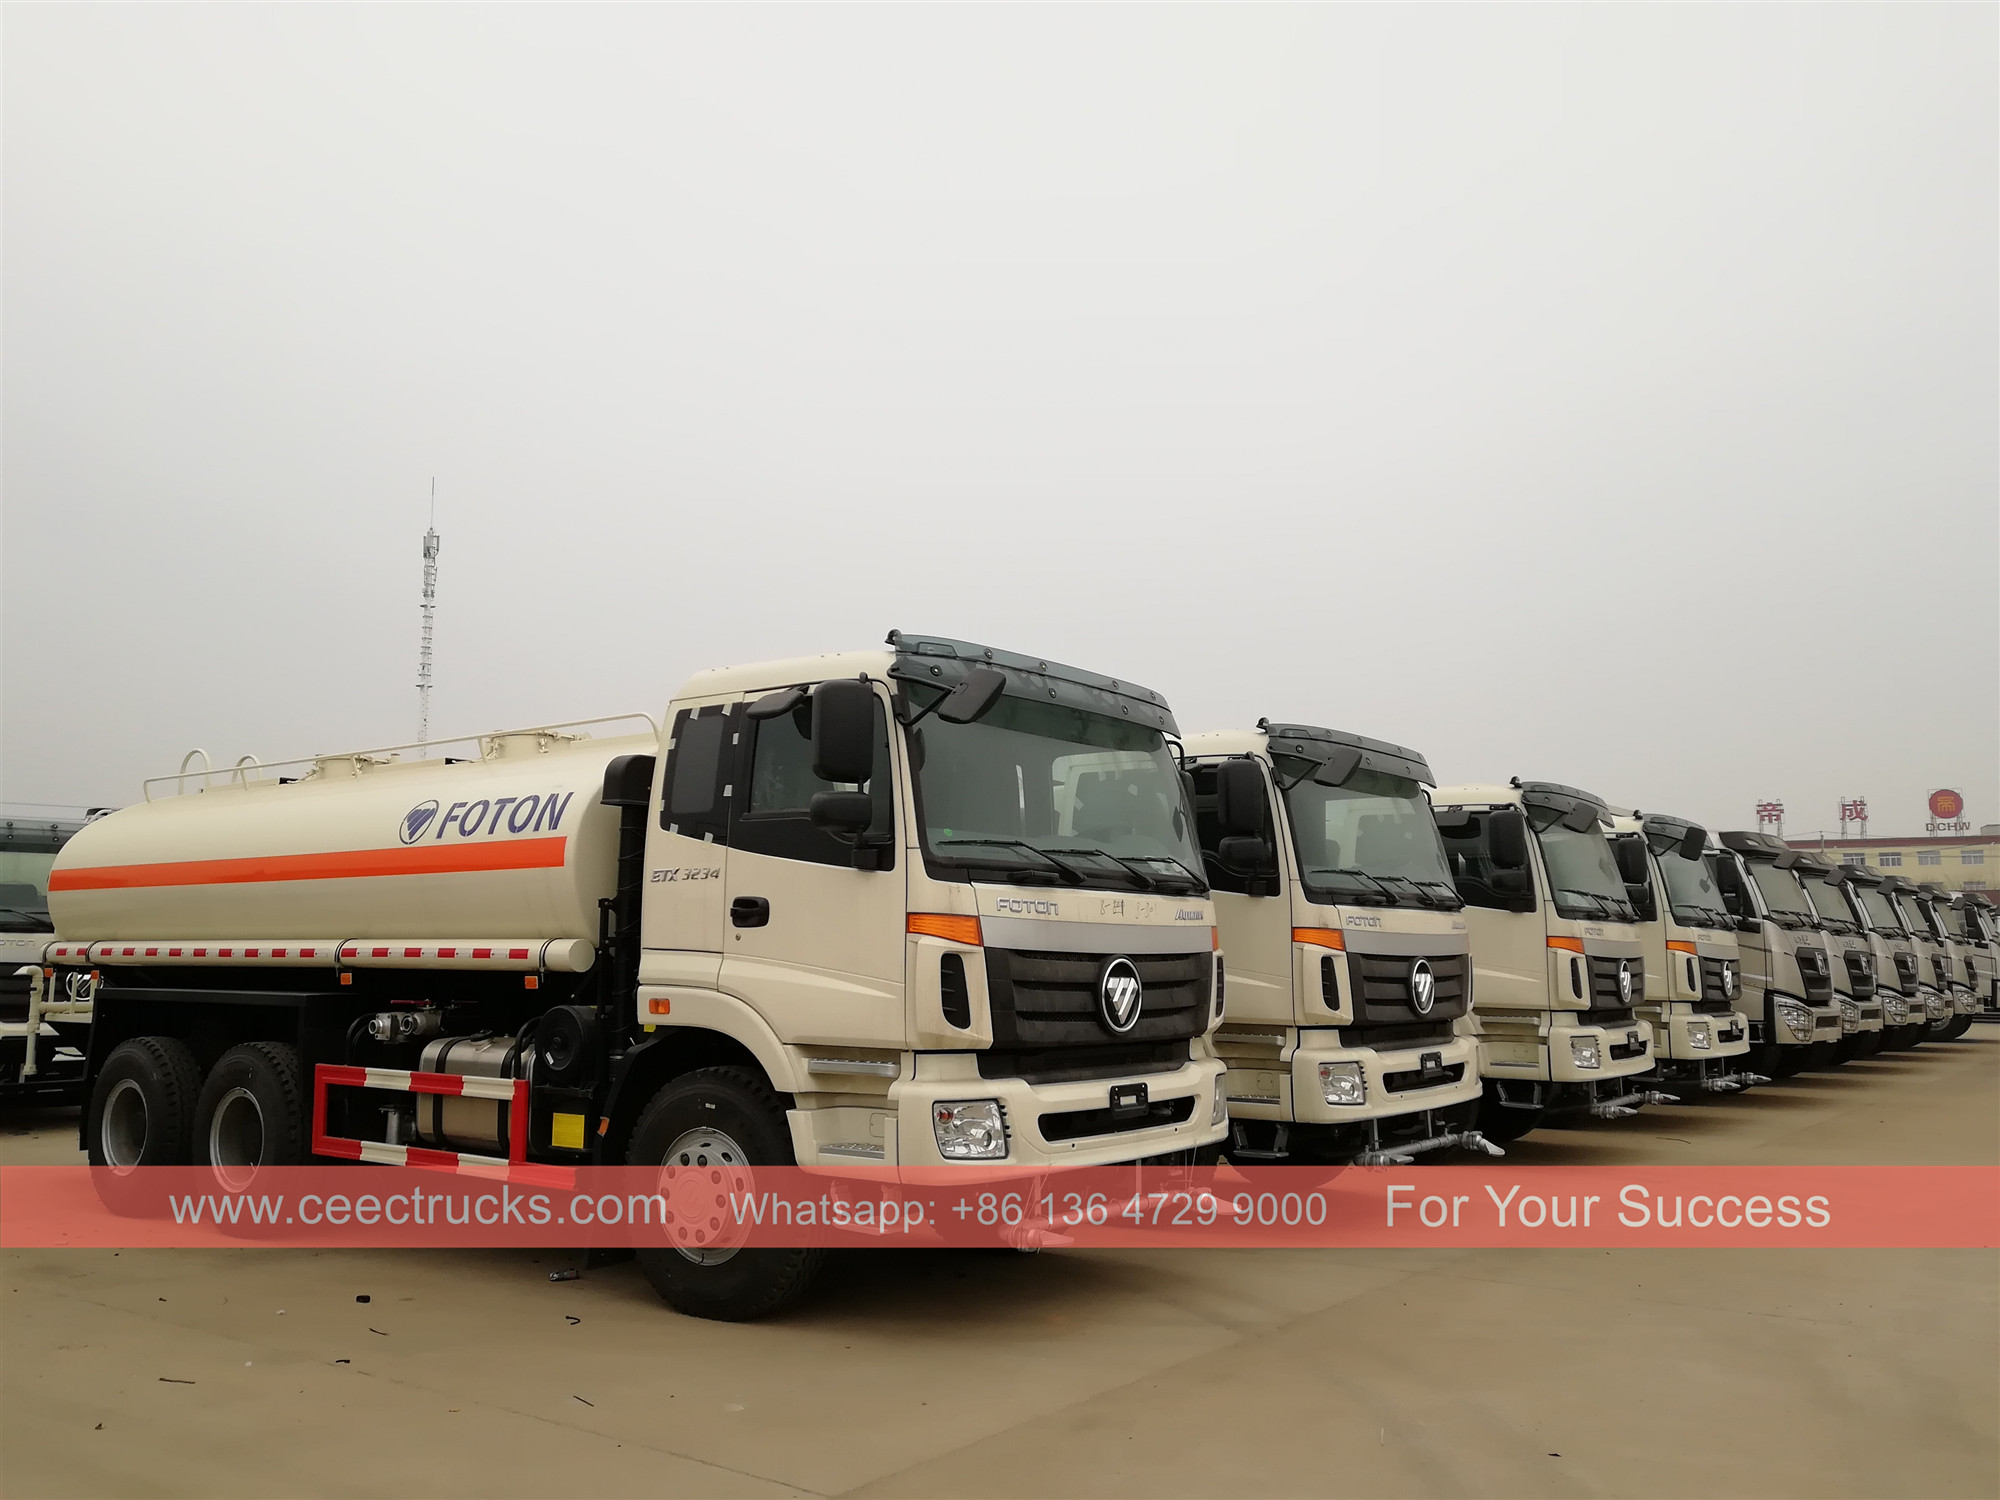 35 units FOTON Water tanker trucks were delivered to Africa